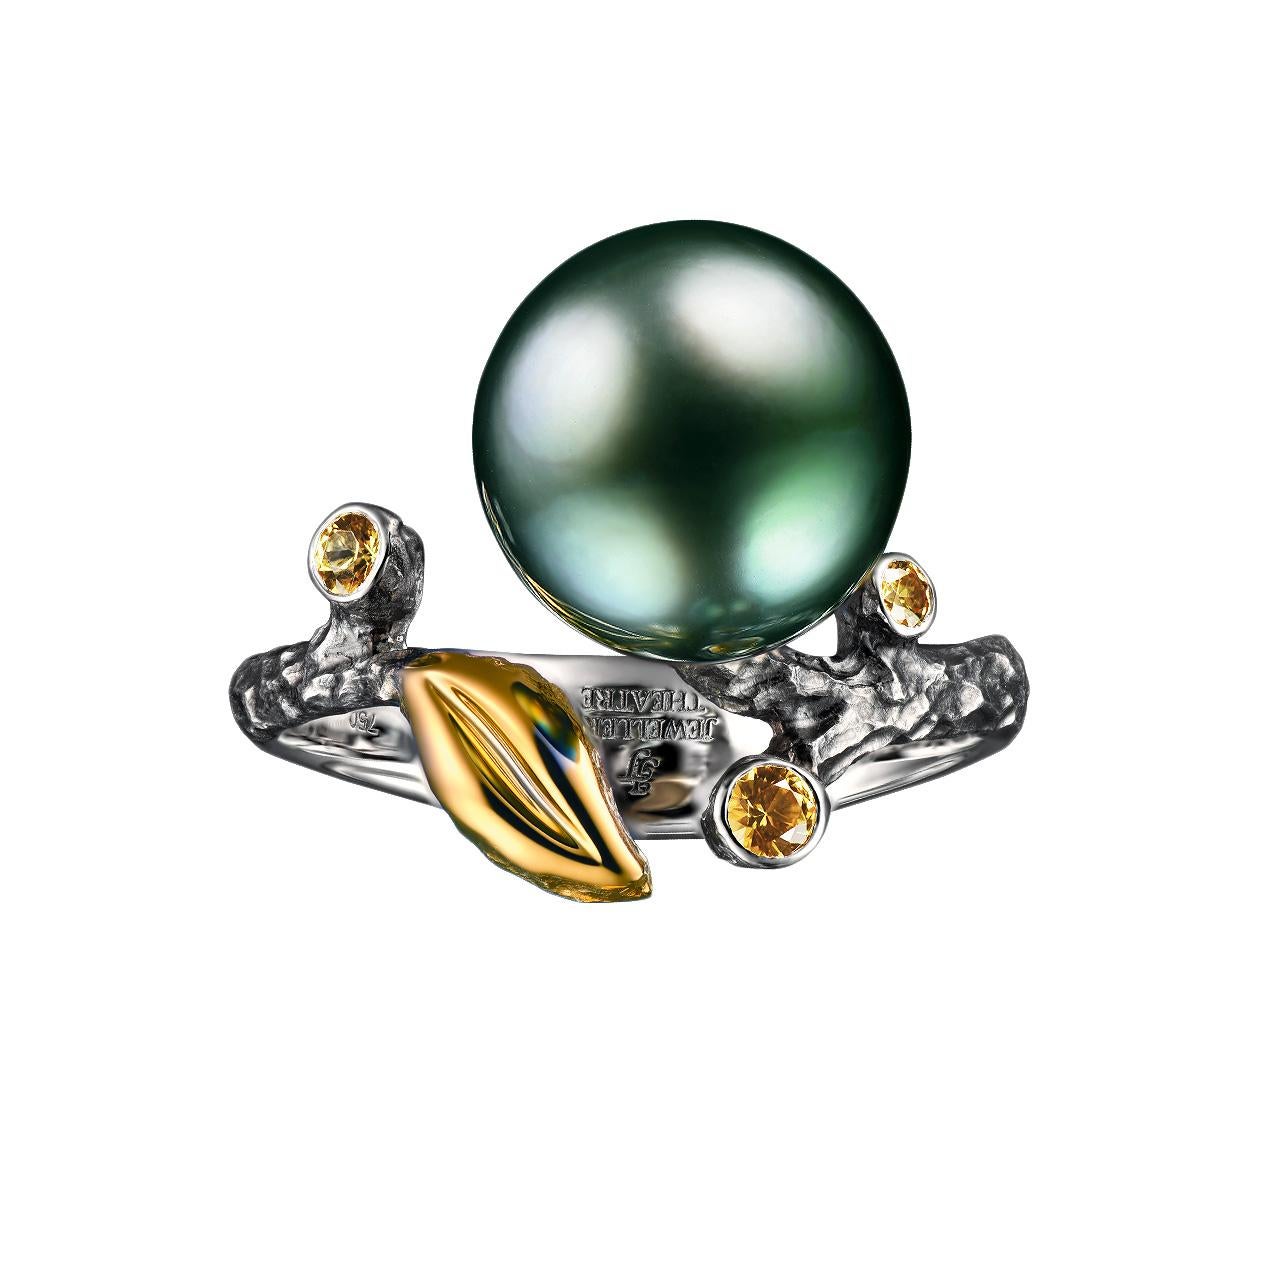 - 4 Round Yellow Sapphires - 0,15 ct
- 10-10,5 mm Dark Tahitian Pearl
- 18K White Gold 
- Weight: 5.96 g
- Size: 18 mm
This ring from the Eden collection features a lustrous Dark Tahitian pearl of 10-10,5 mm diameter. The design is complete with 4